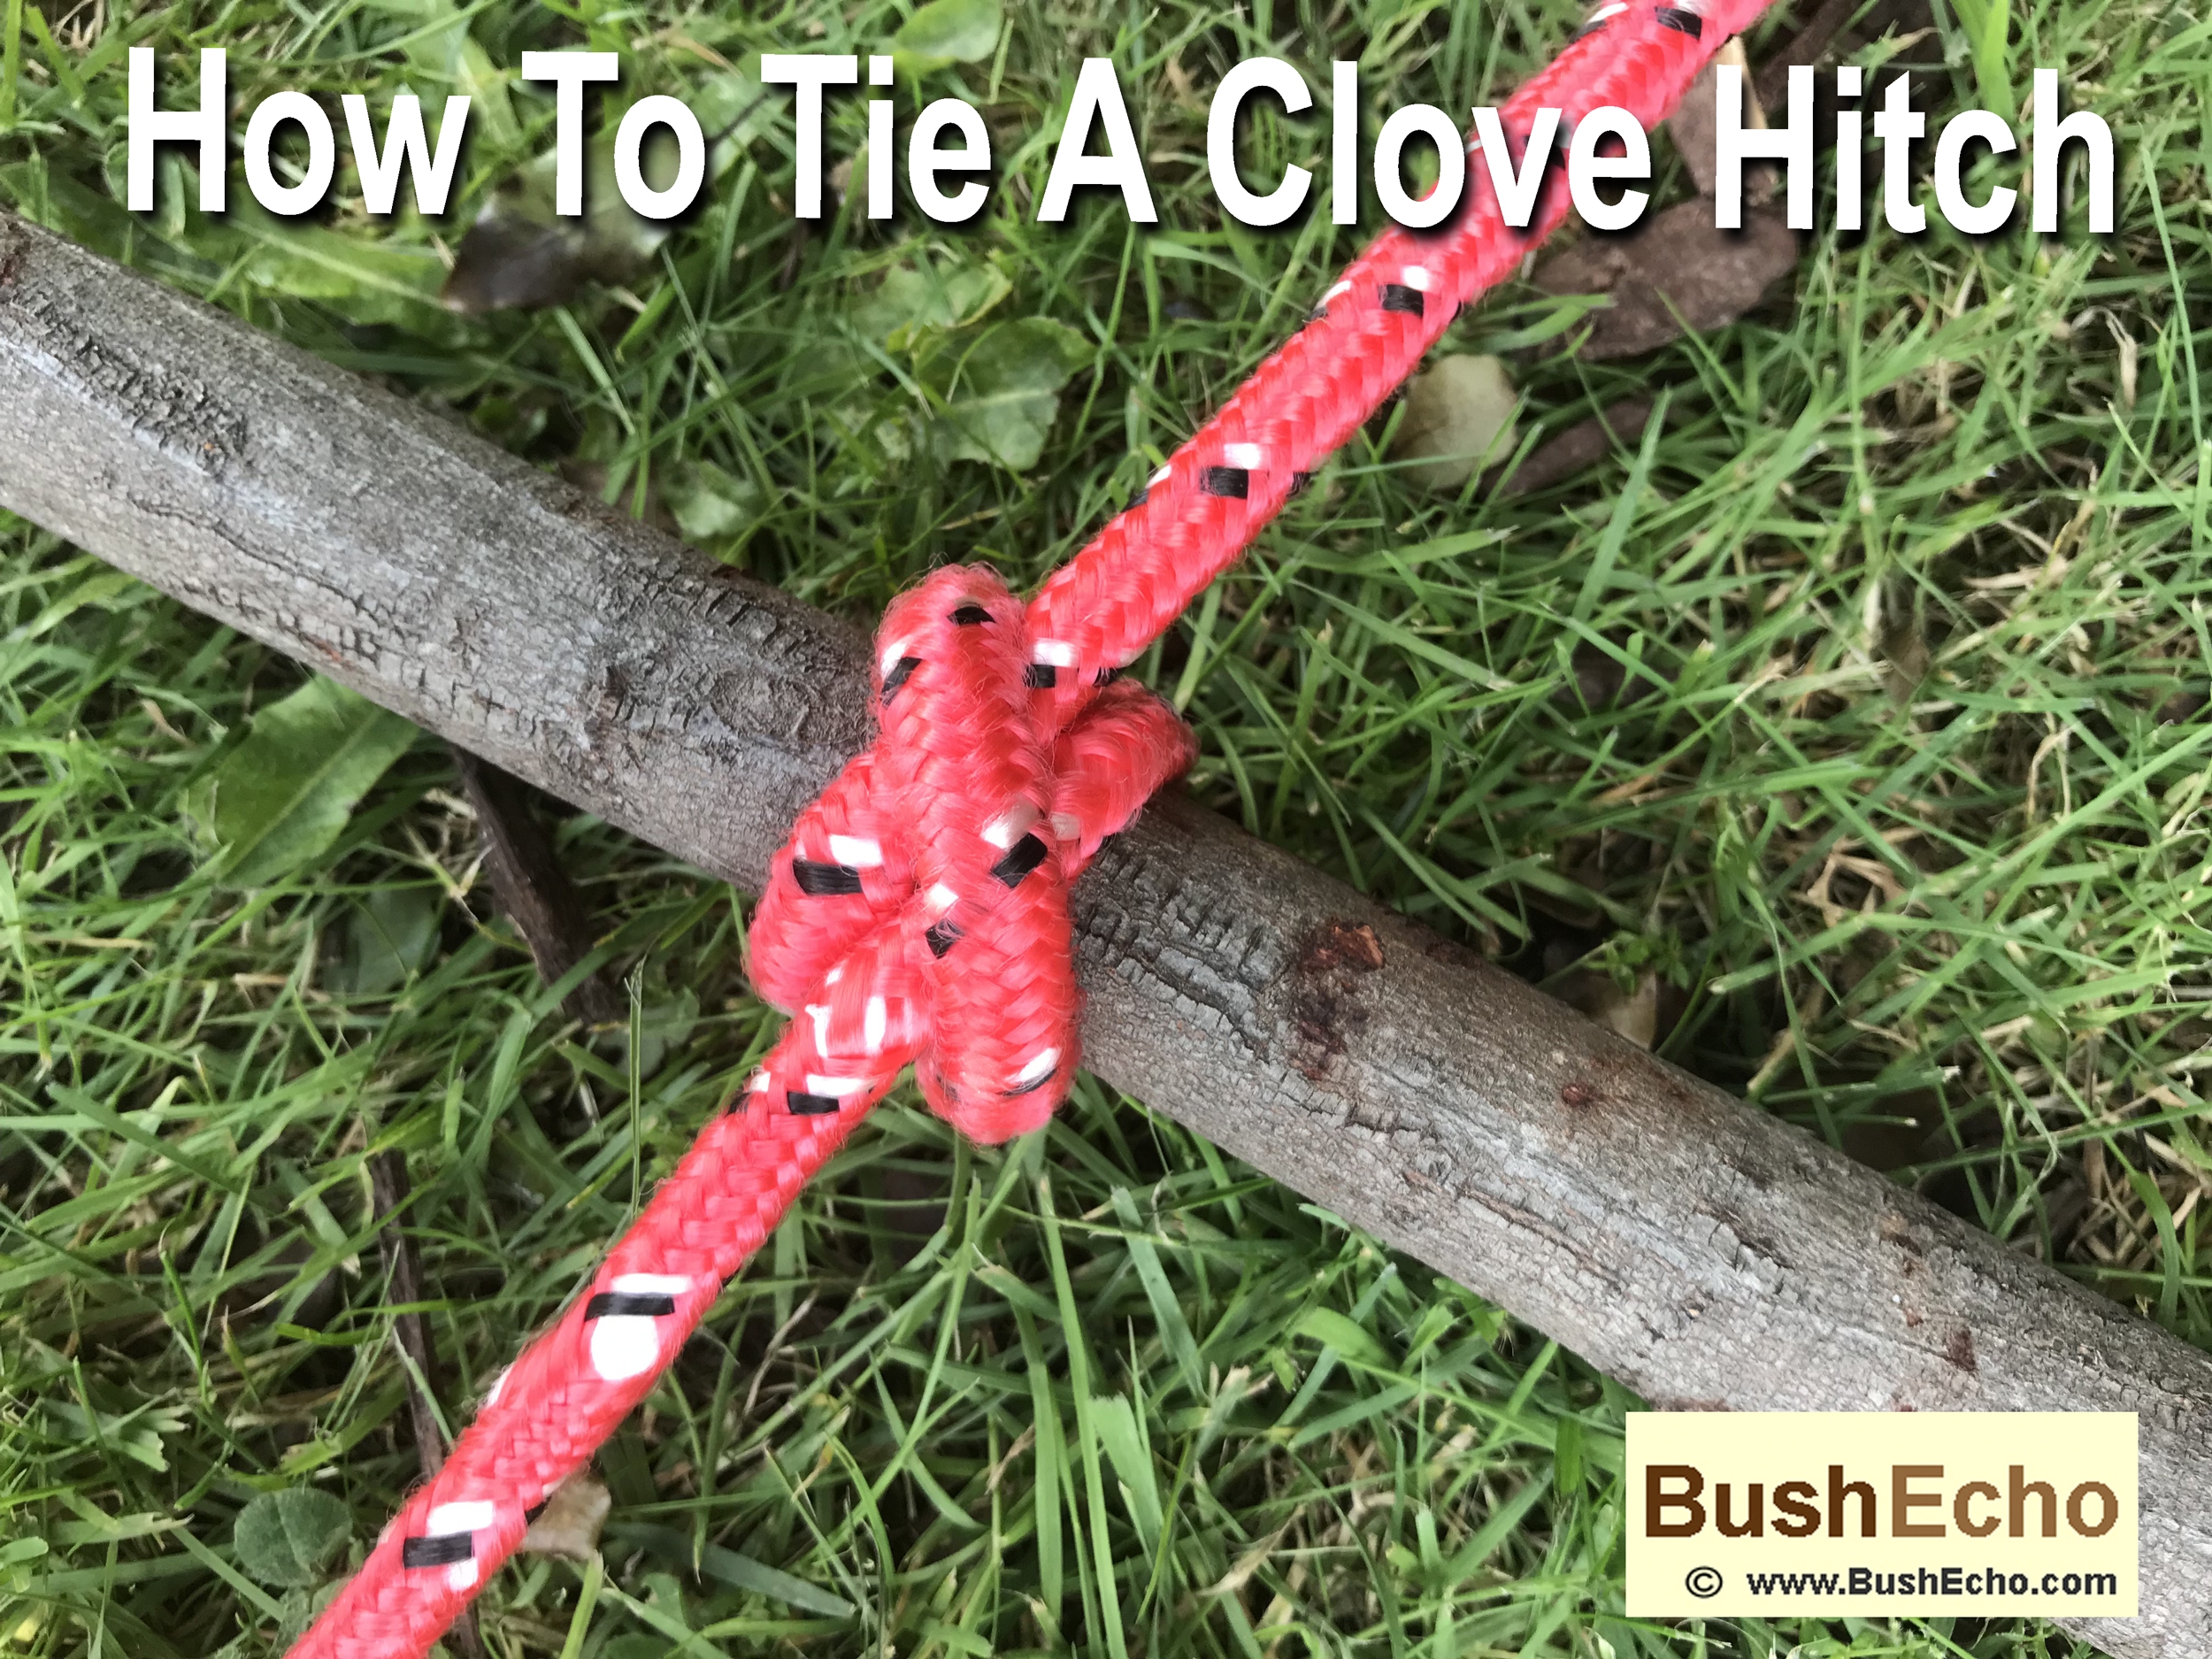 How To Tie A Clove Hitch.